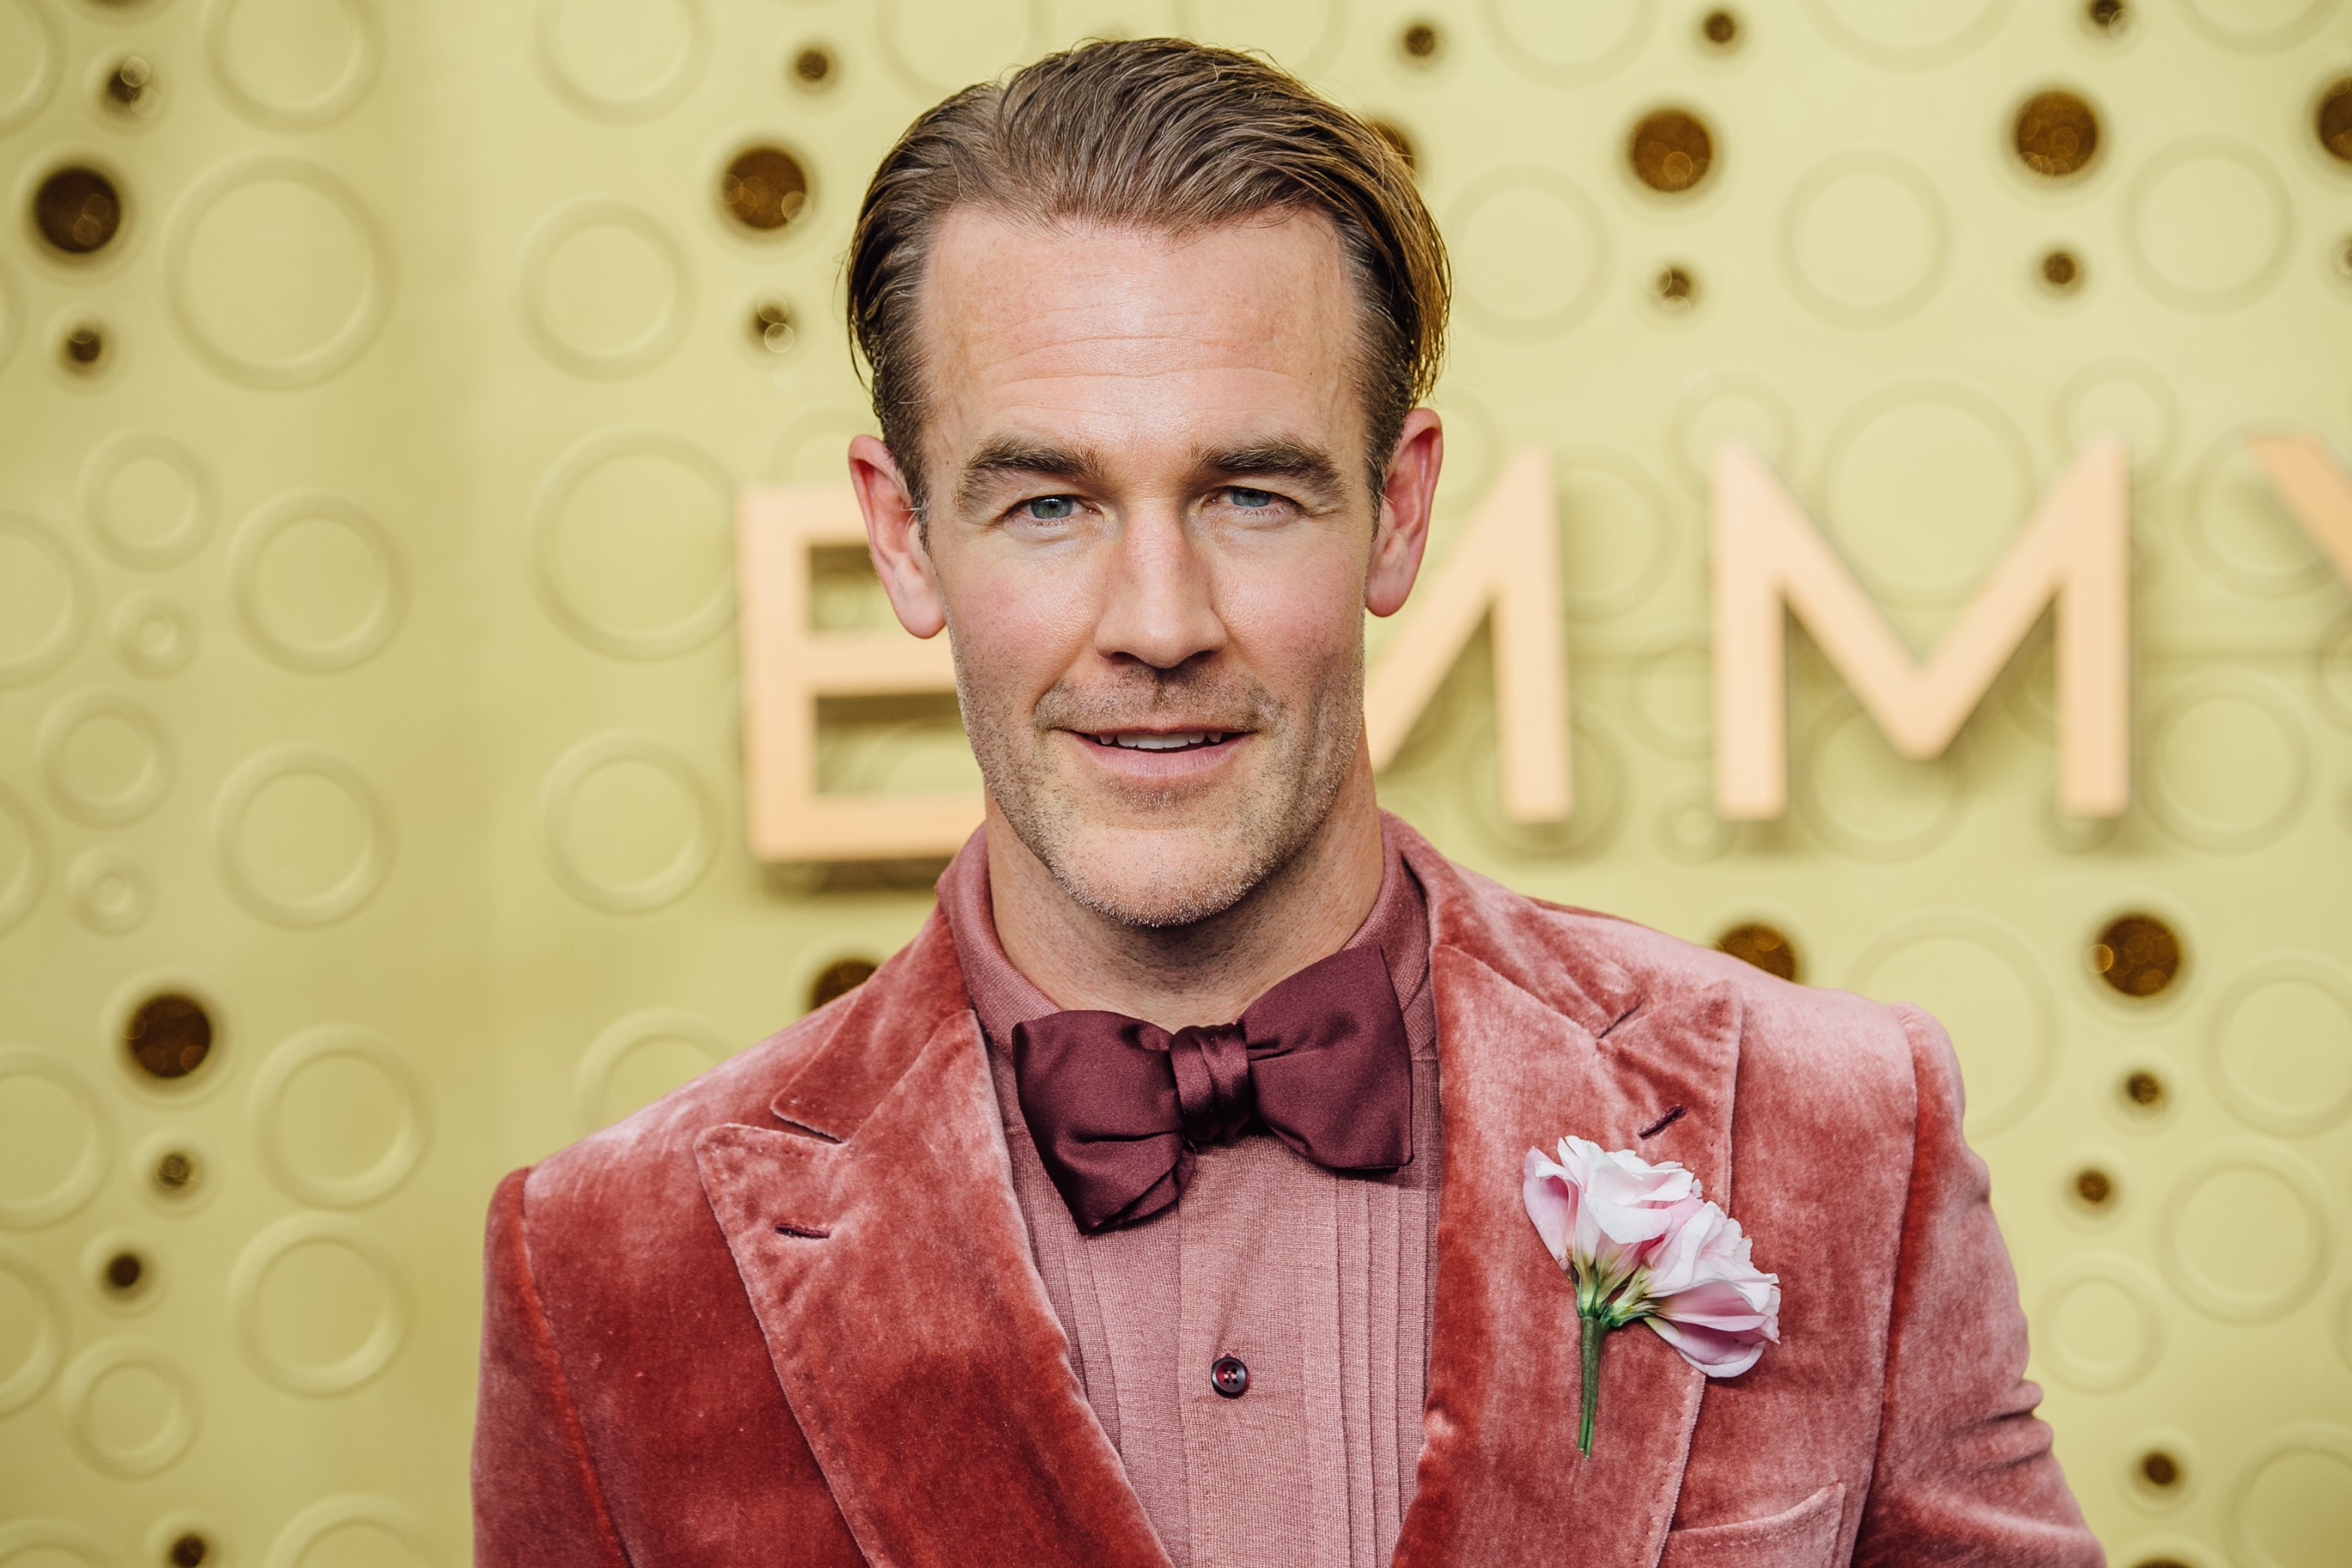 James Van der Beek arrives at the 71st Emmy Awards at Microsoft Theater on September 22, 2019 in Los Angeles, California | Photo: Getty Images